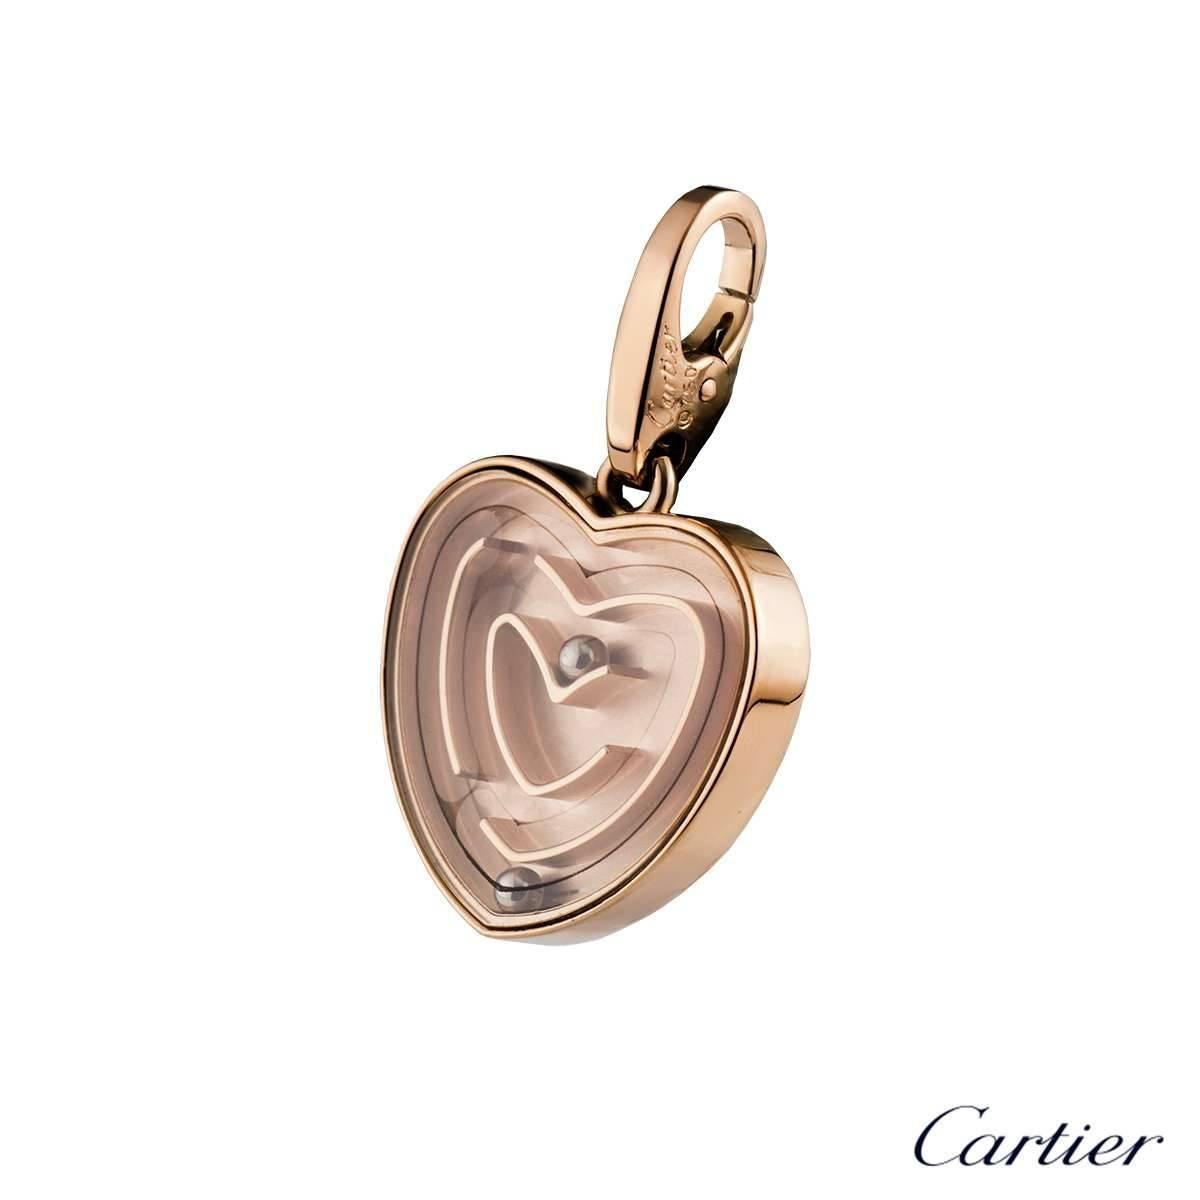 A stylish 18k rose gold Cartier heart maze pendant. The pendant comprises of a heart motif with a maze cased behind a pane of glass. Within the maze are 2 ball bearings freely moving throughout the maze. The pendant measures 17mm in height and 18mm